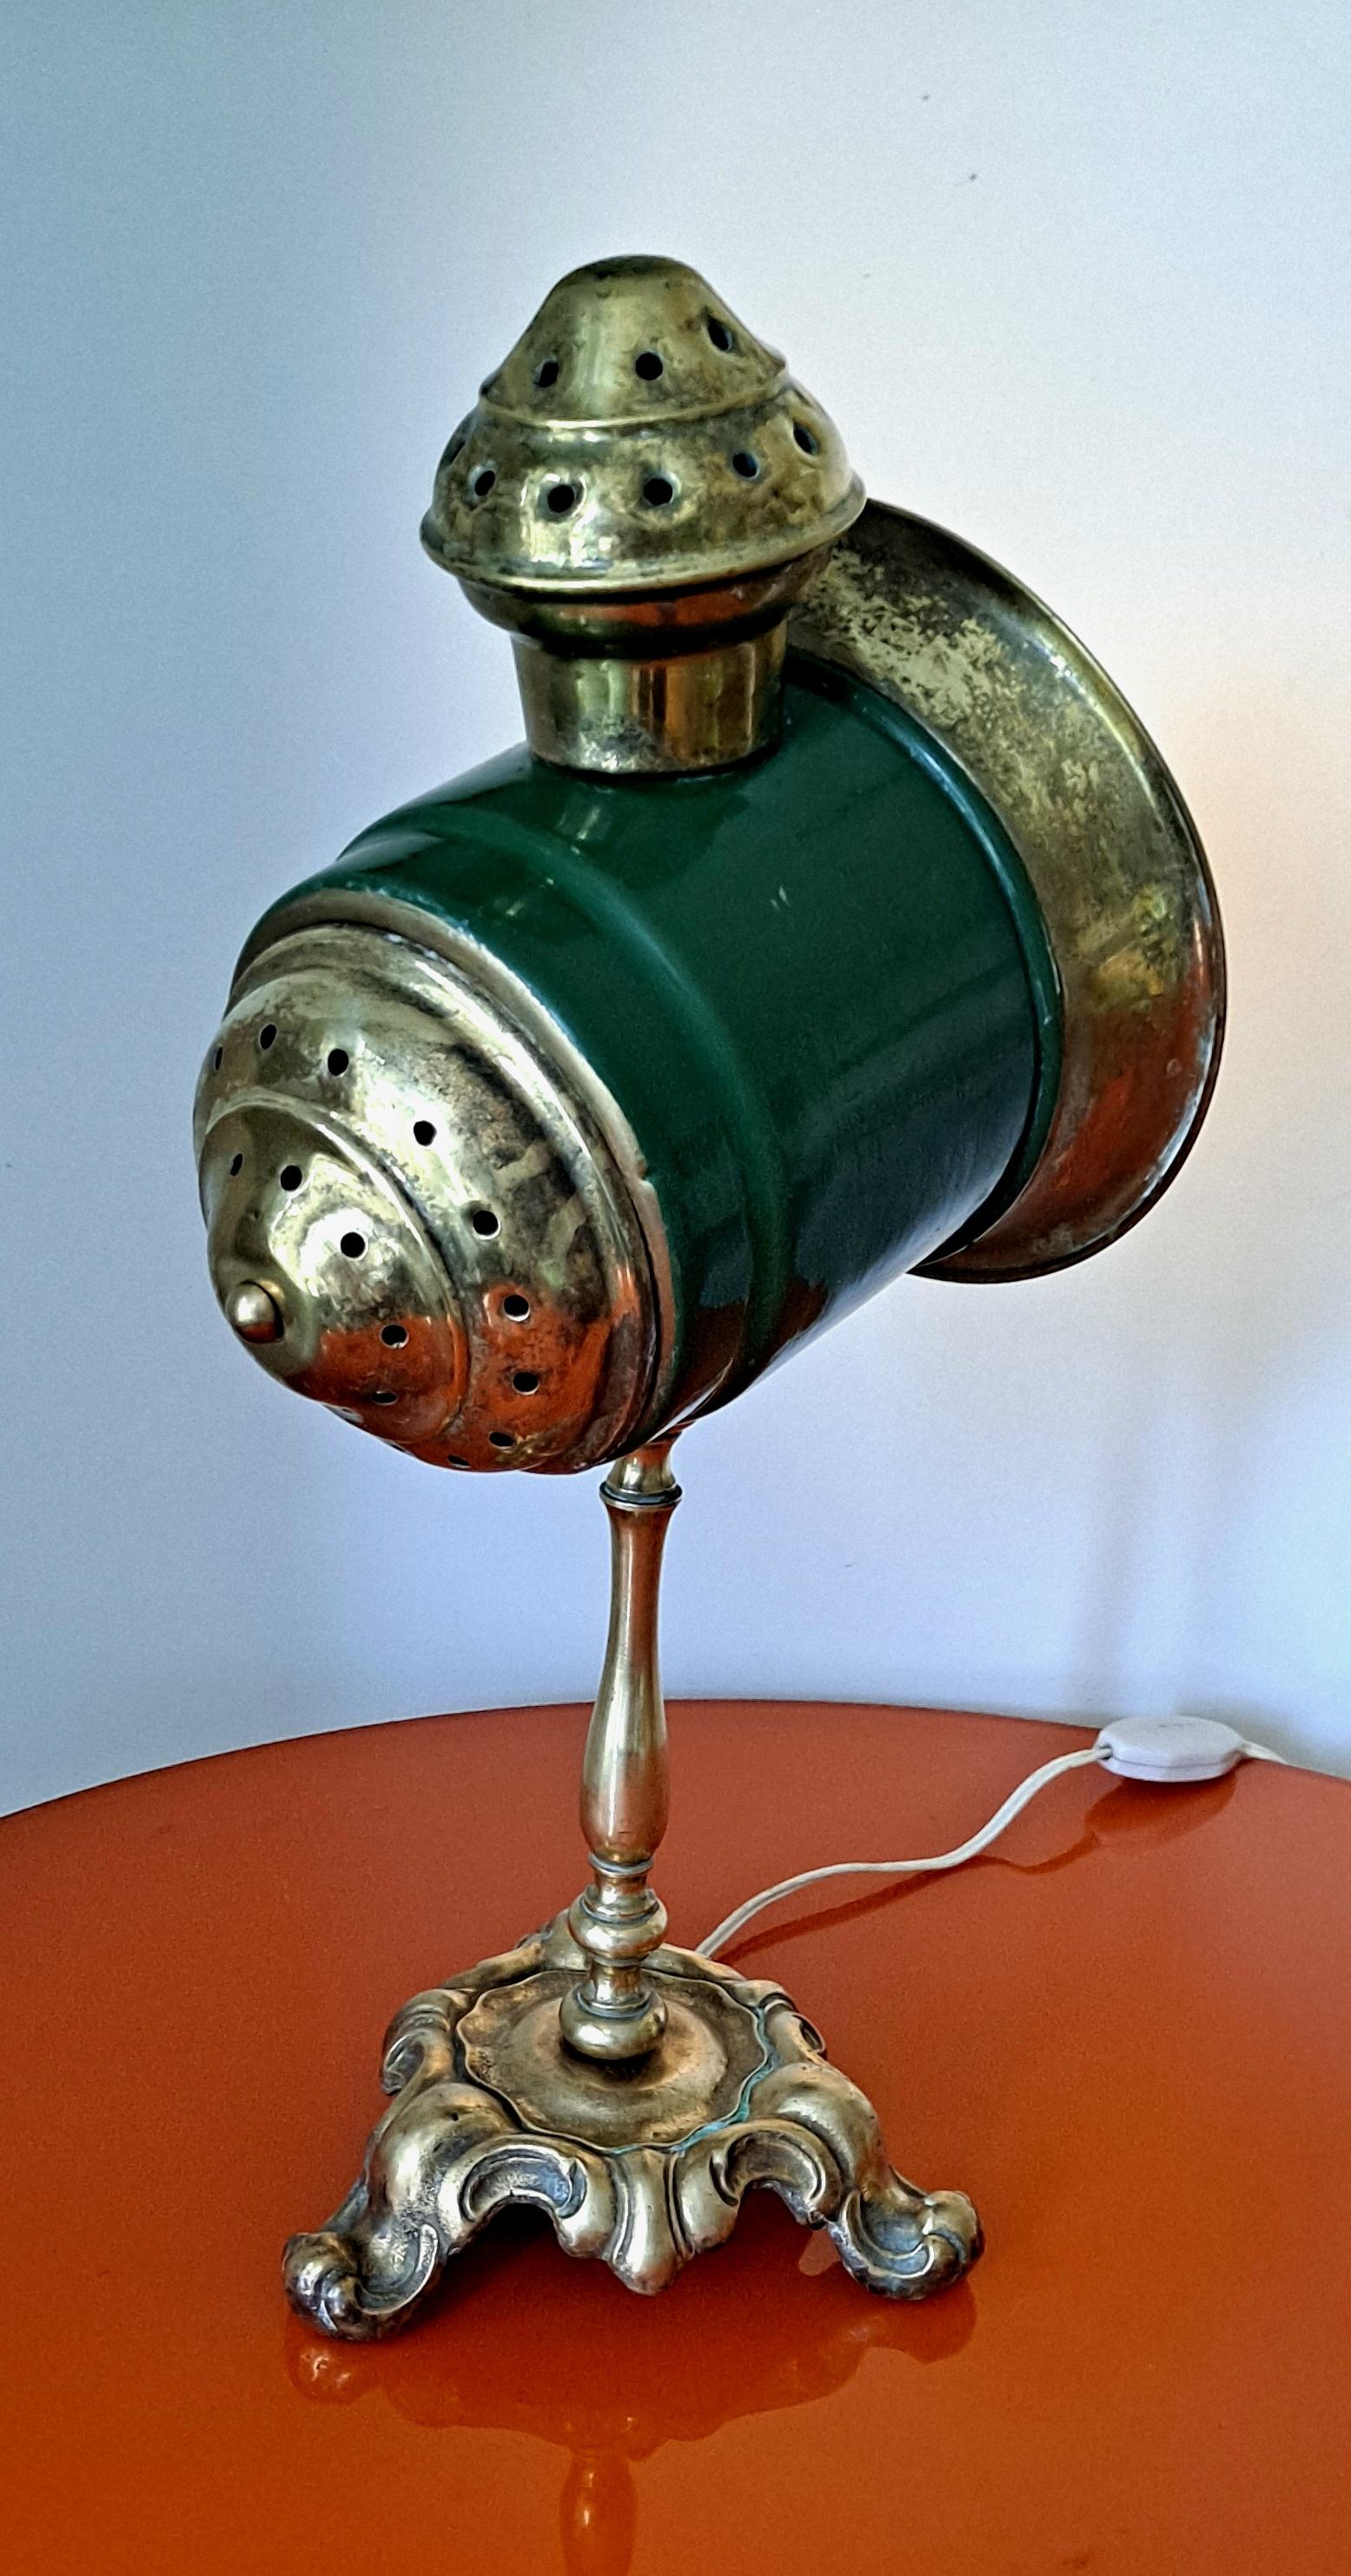 Antique Italian table lamp used in the 1900 s like the carriage spot light working on the petroleum .Lamp have the Murano glass behind the bulb to produce enormous spot light  for the traveling .
 I recommend bulbs no more than 25 watts or floor